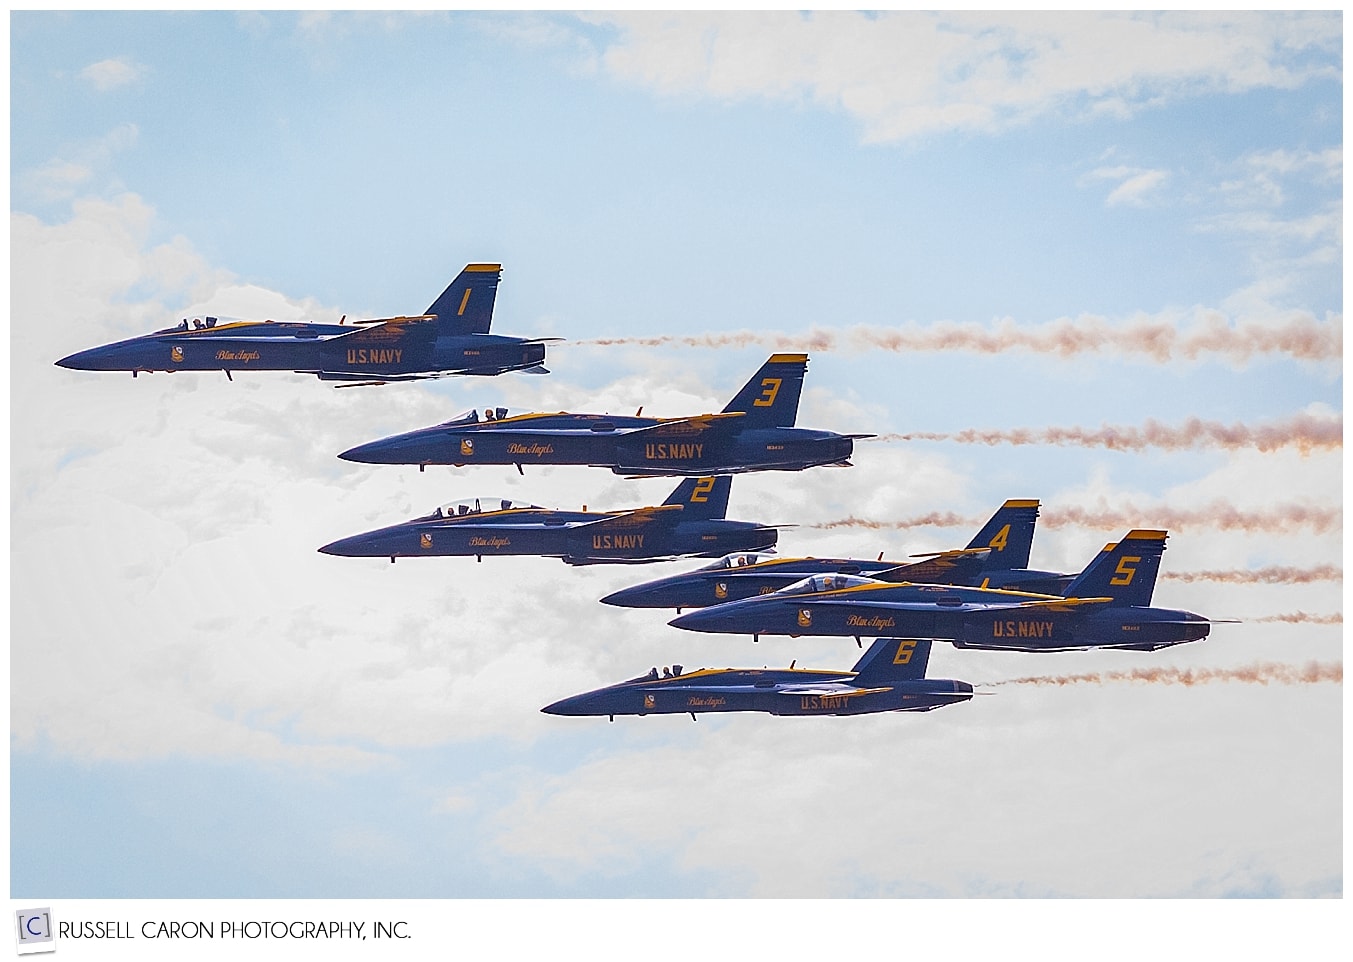 6 US Navy Blue Angels flying during the Great State of Maine Air Show 2017